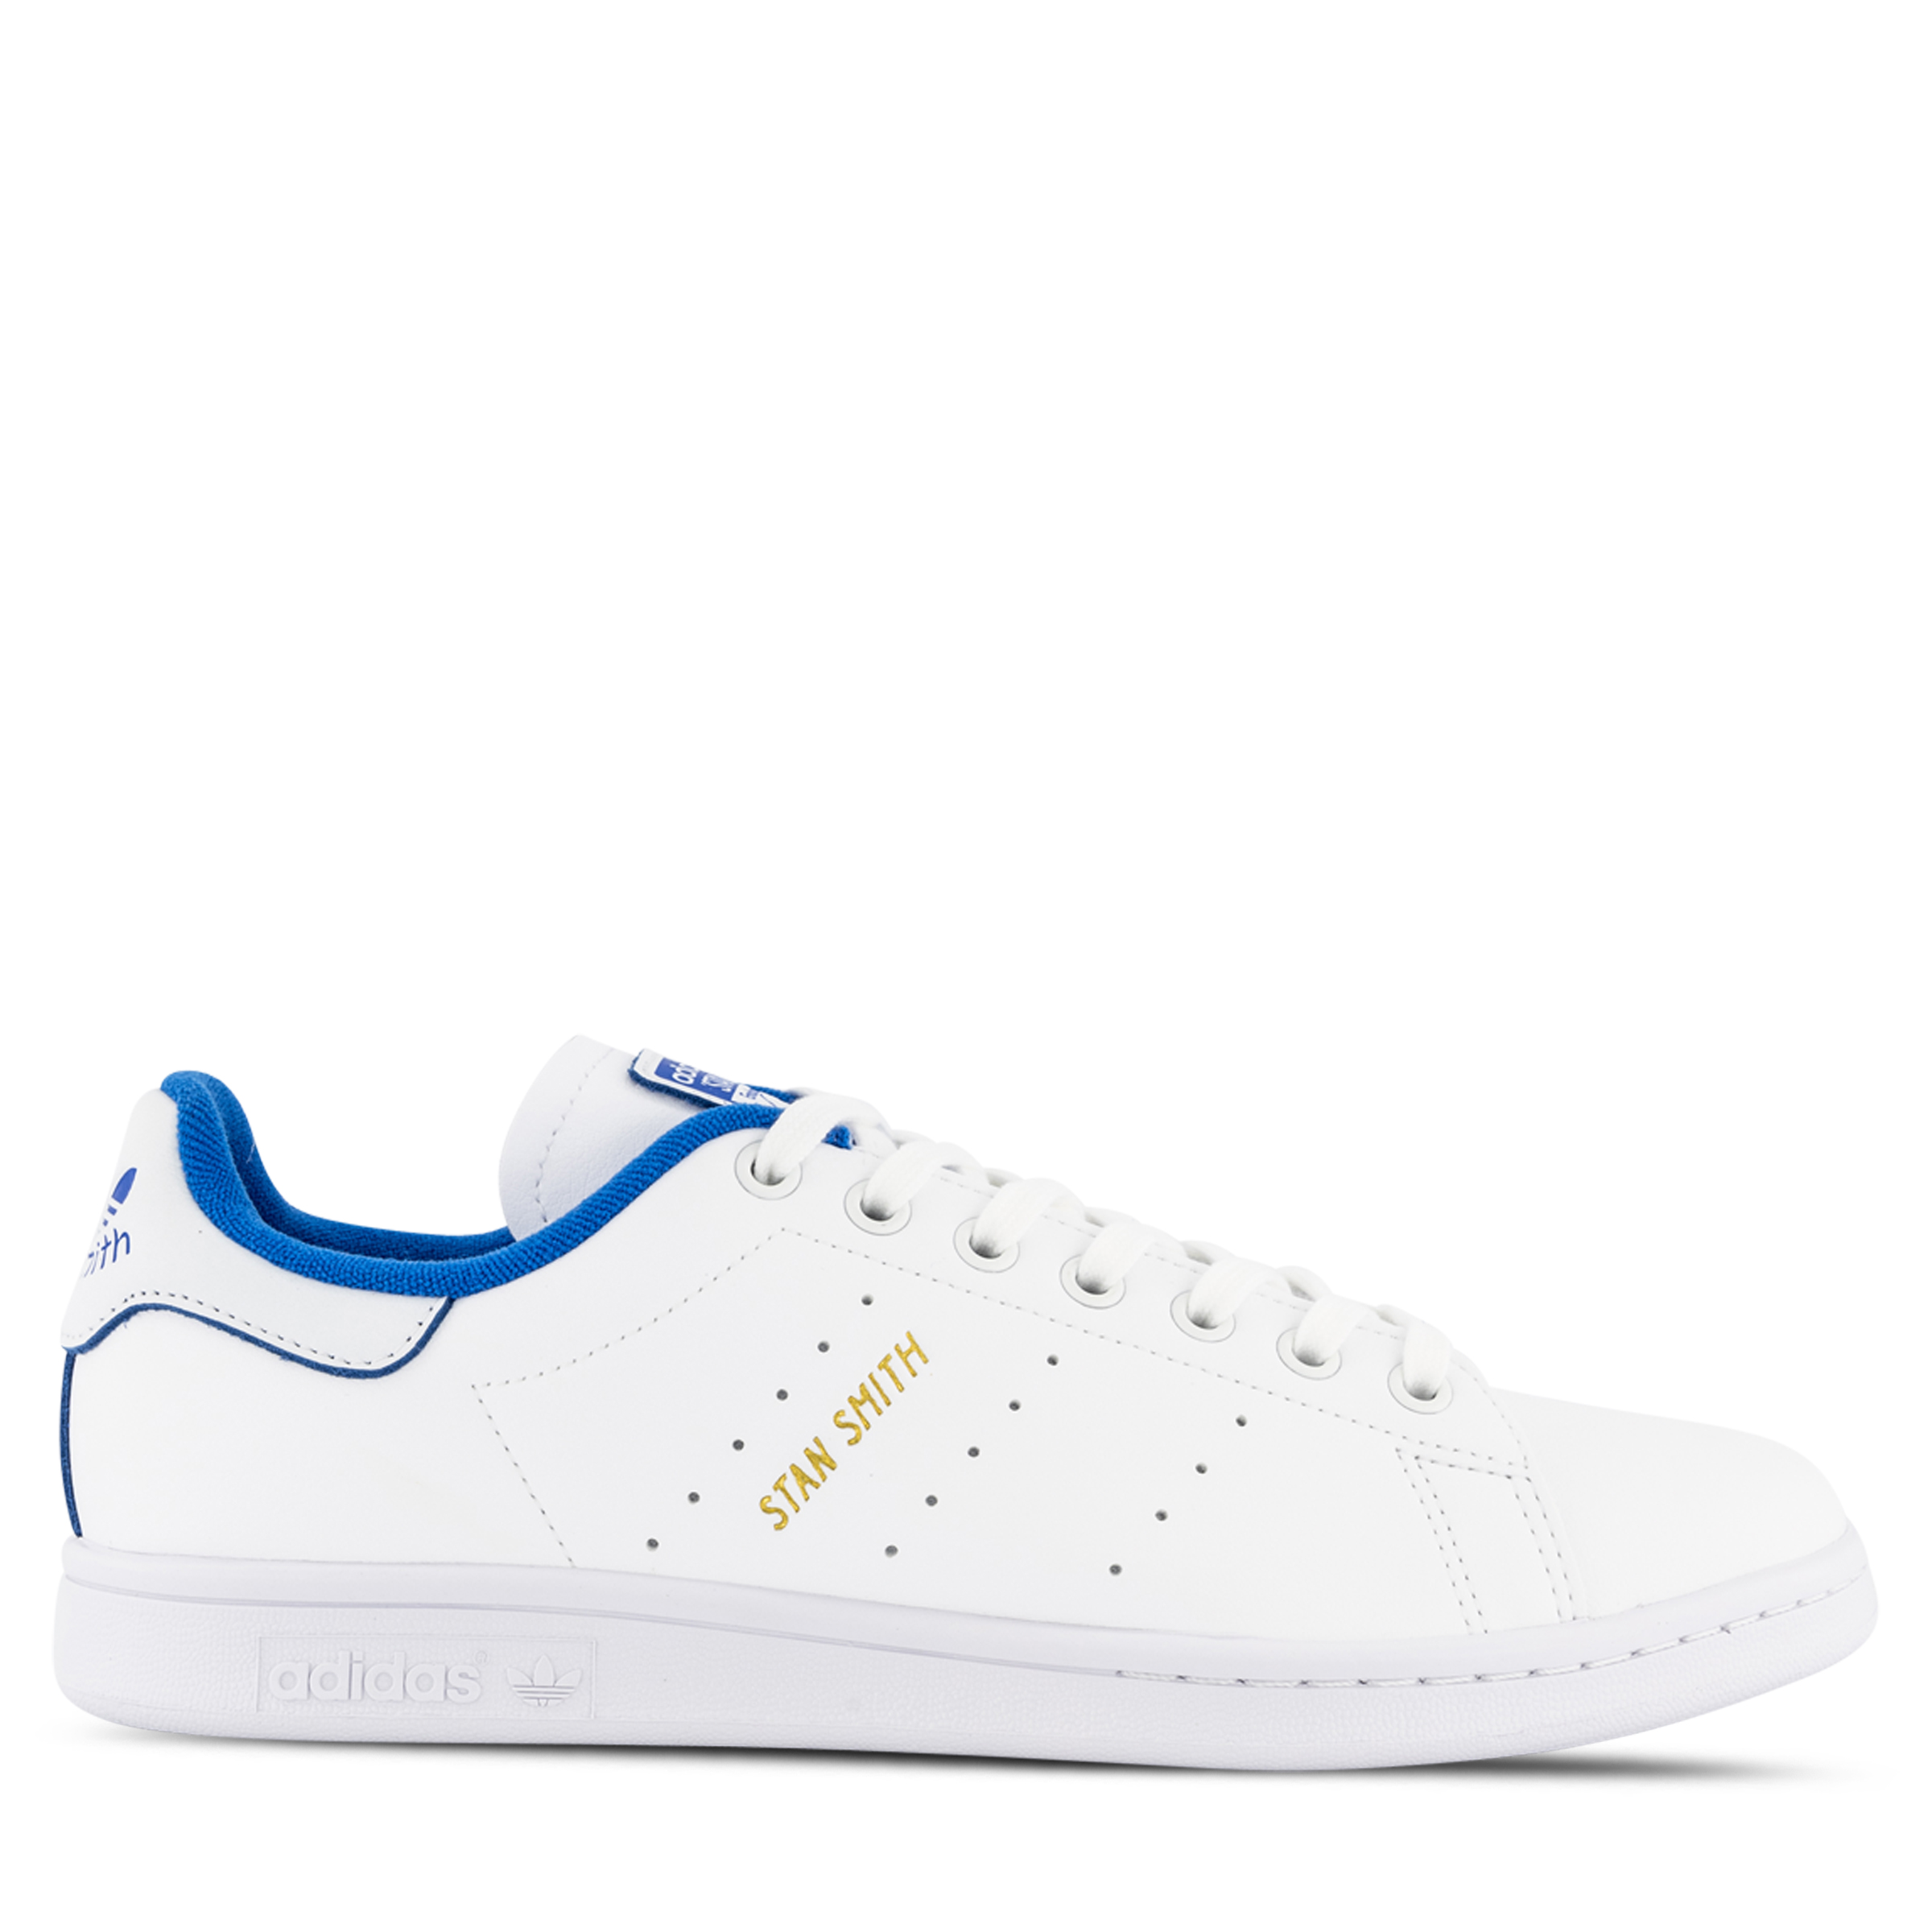 Save 4% adidas Originals Leather Stan Smith Og Sneakers in White/Green White for Men Mens Trainers adidas Originals Trainers 